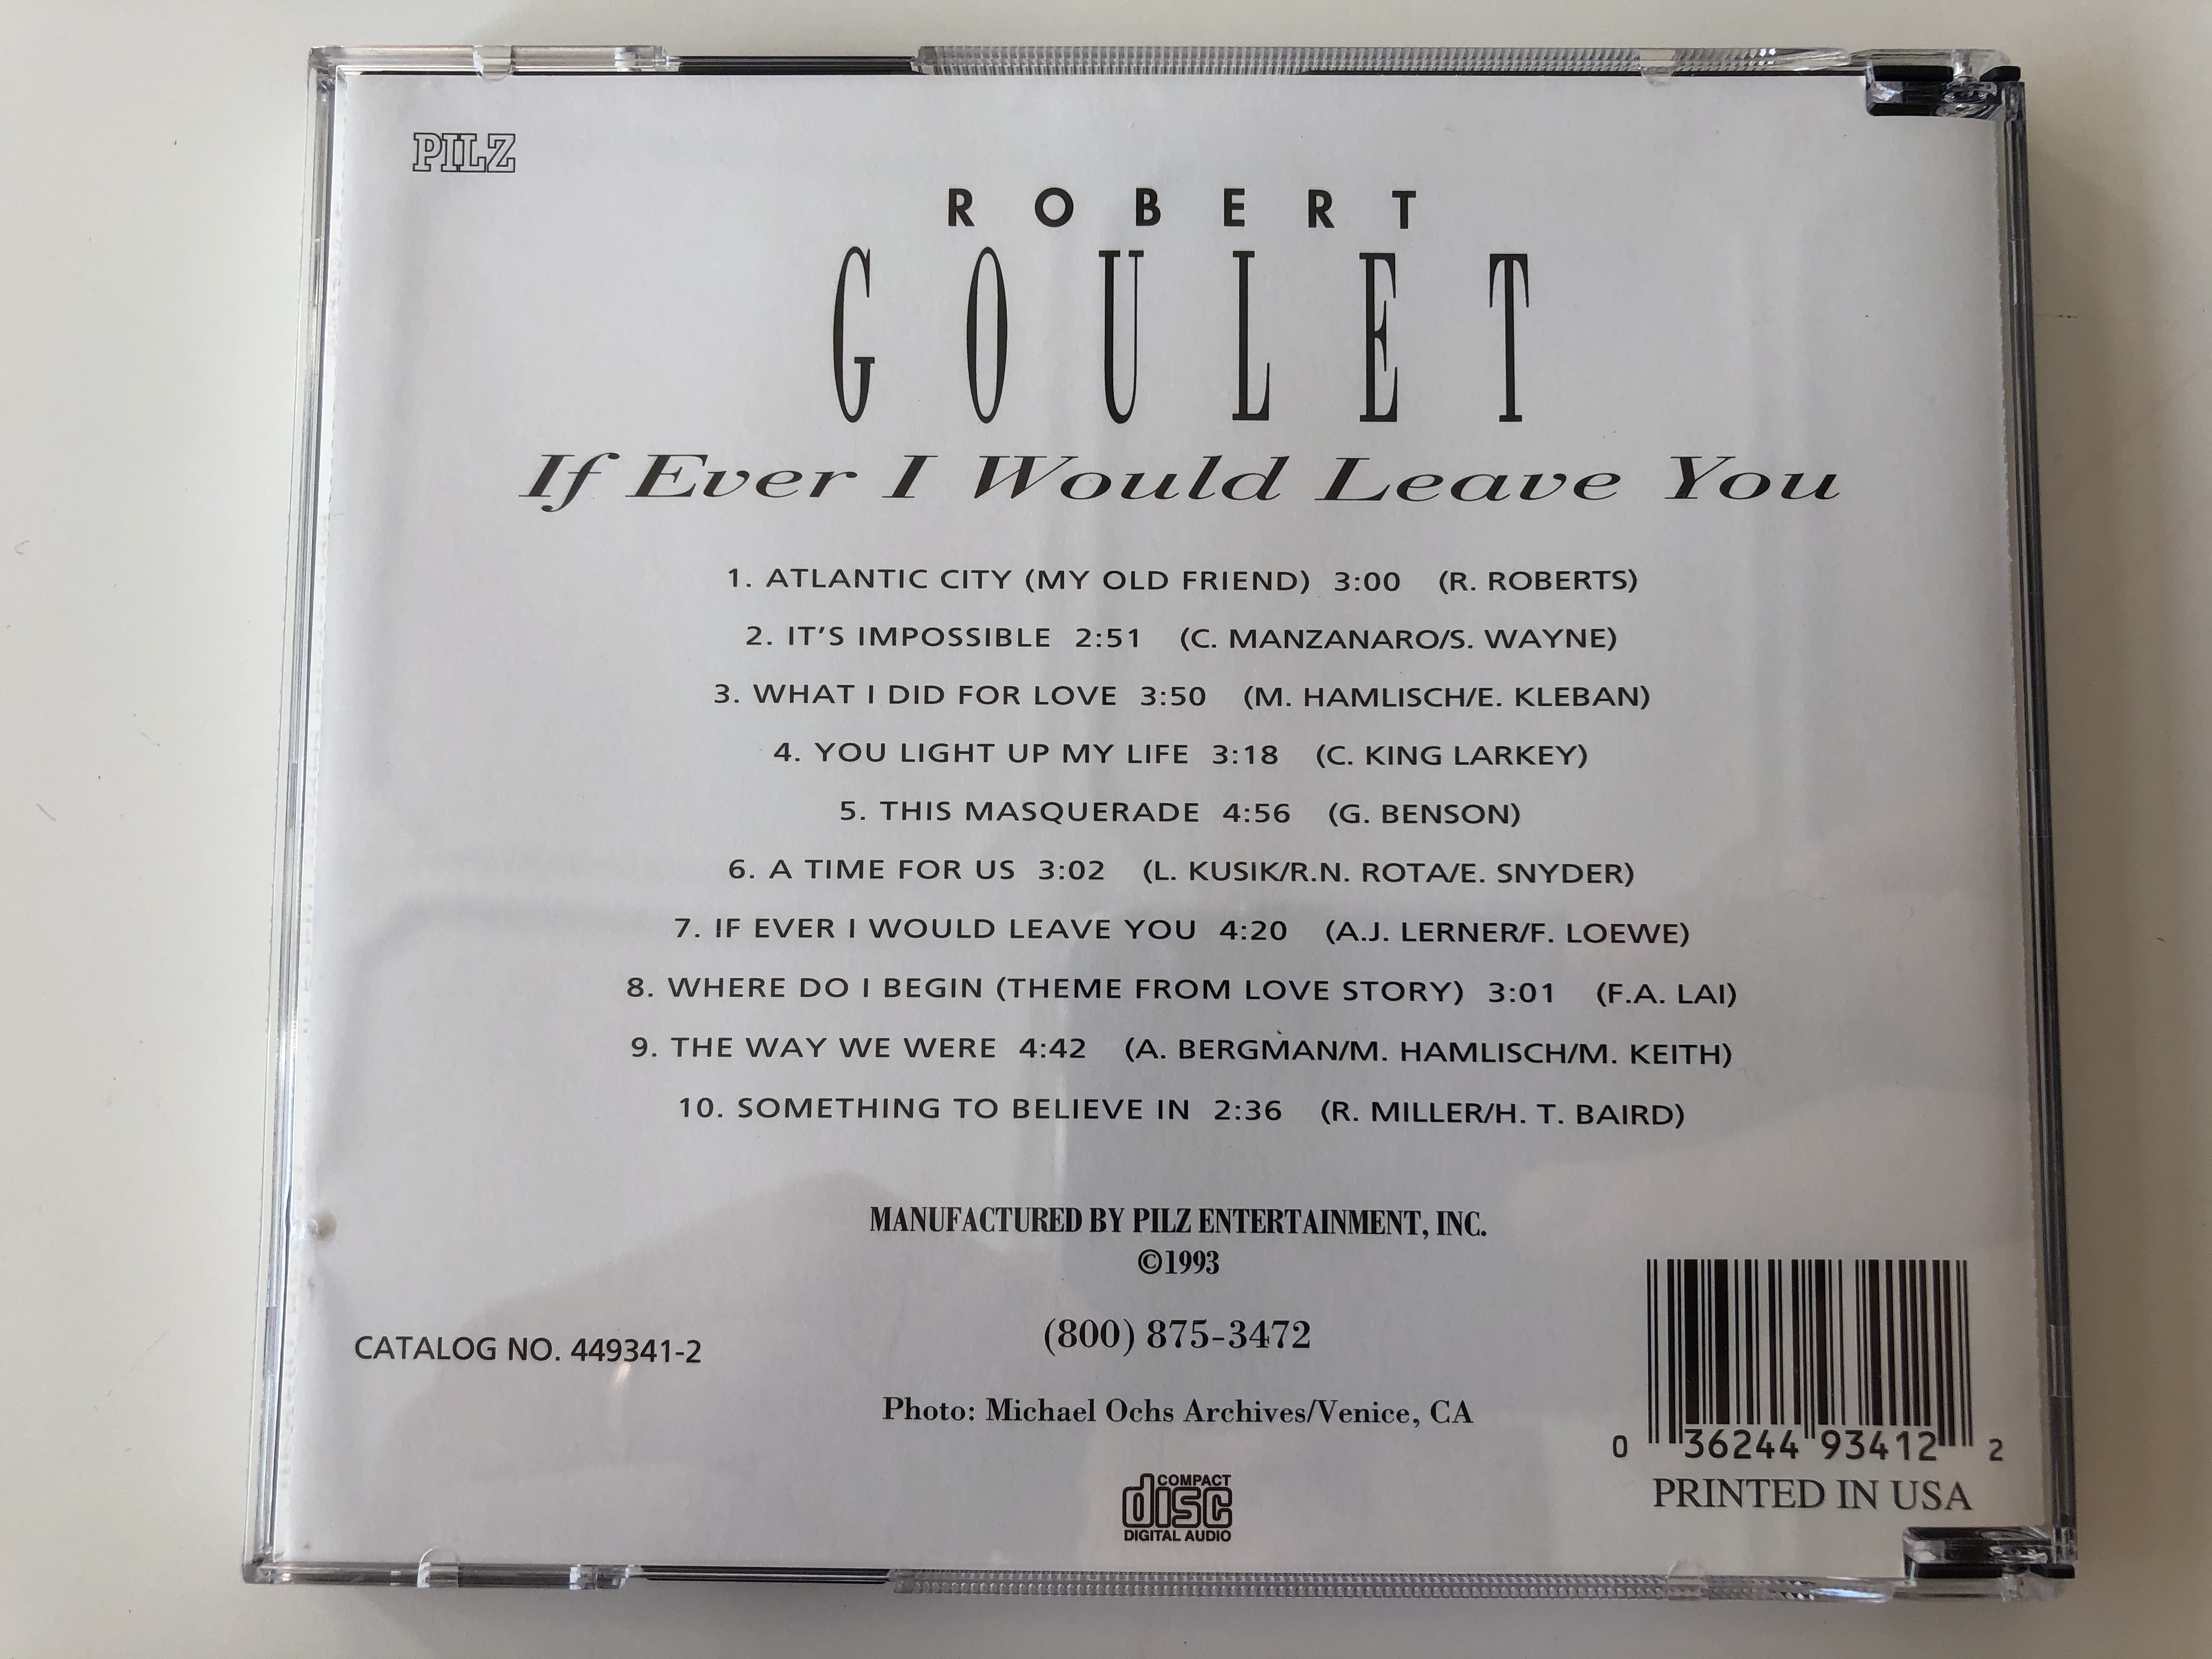 robert-goulet-if-i-ever-would-leave-you-golden-legends-series-pilz-audio-cd-1993-449341-2-4-.jpg